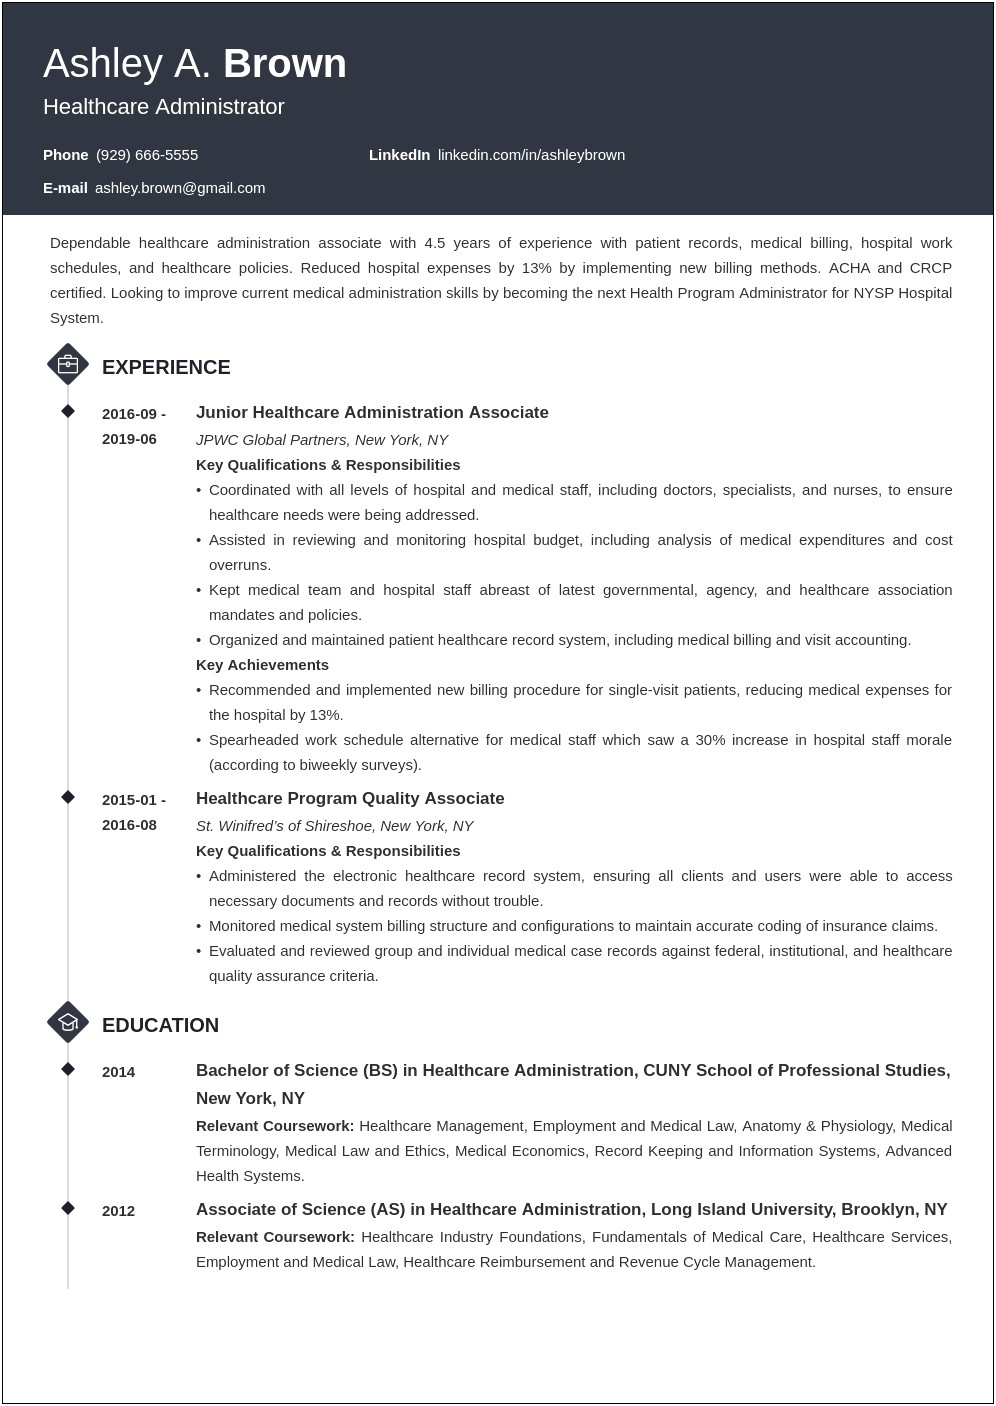 Monster.comhealthcare Resume Objective Examples Monster.com